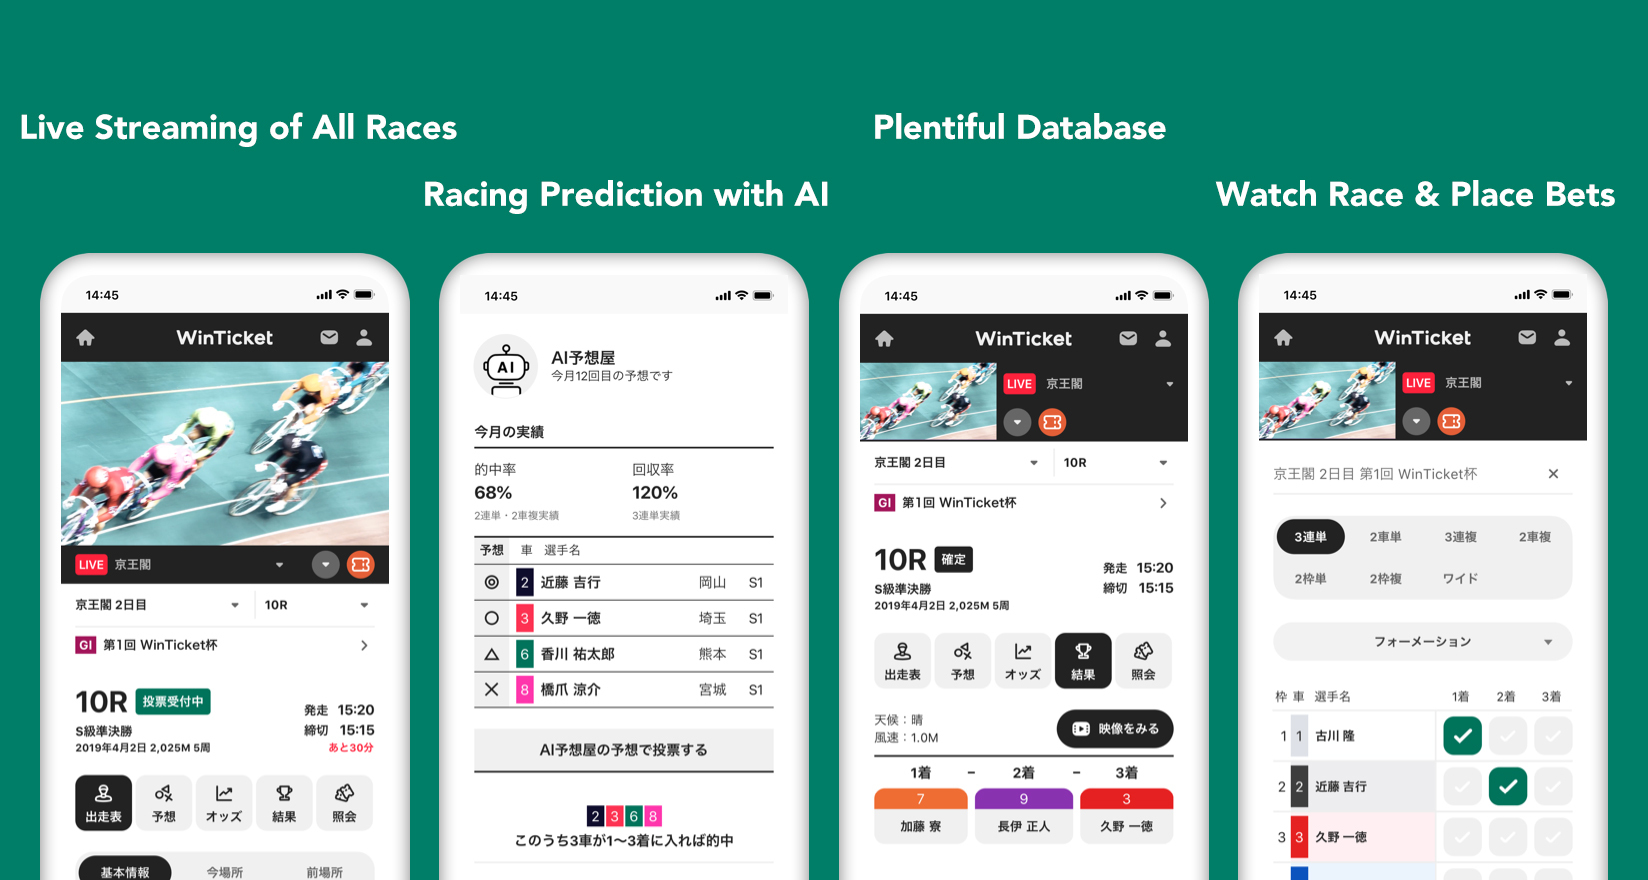 CyberAgent Launches “WinTicket,” an Online Betting Service for Keirin (Cycle Race) CyberAgent, Inc.